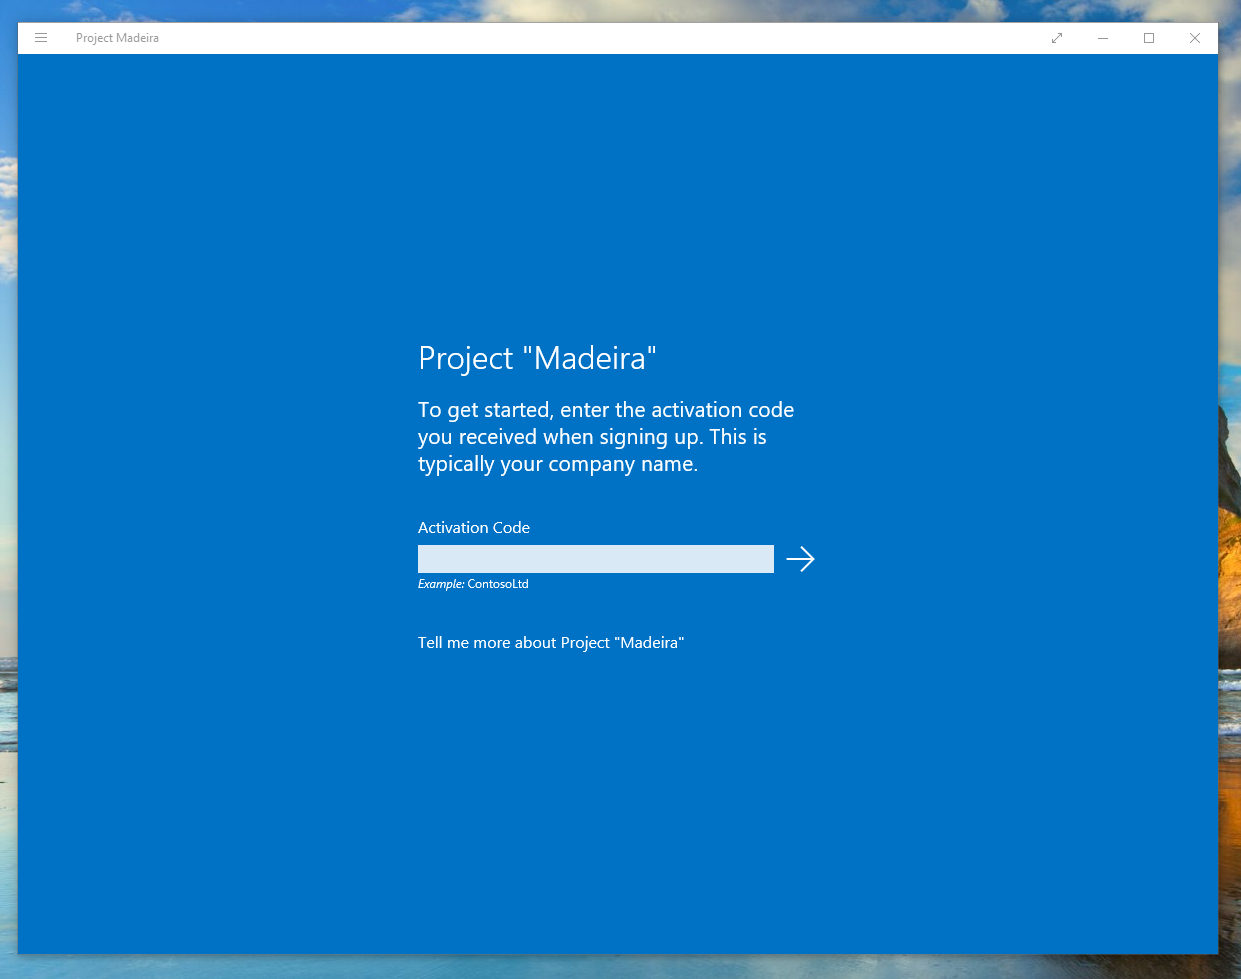 Project Madeira app now available for Windows 10